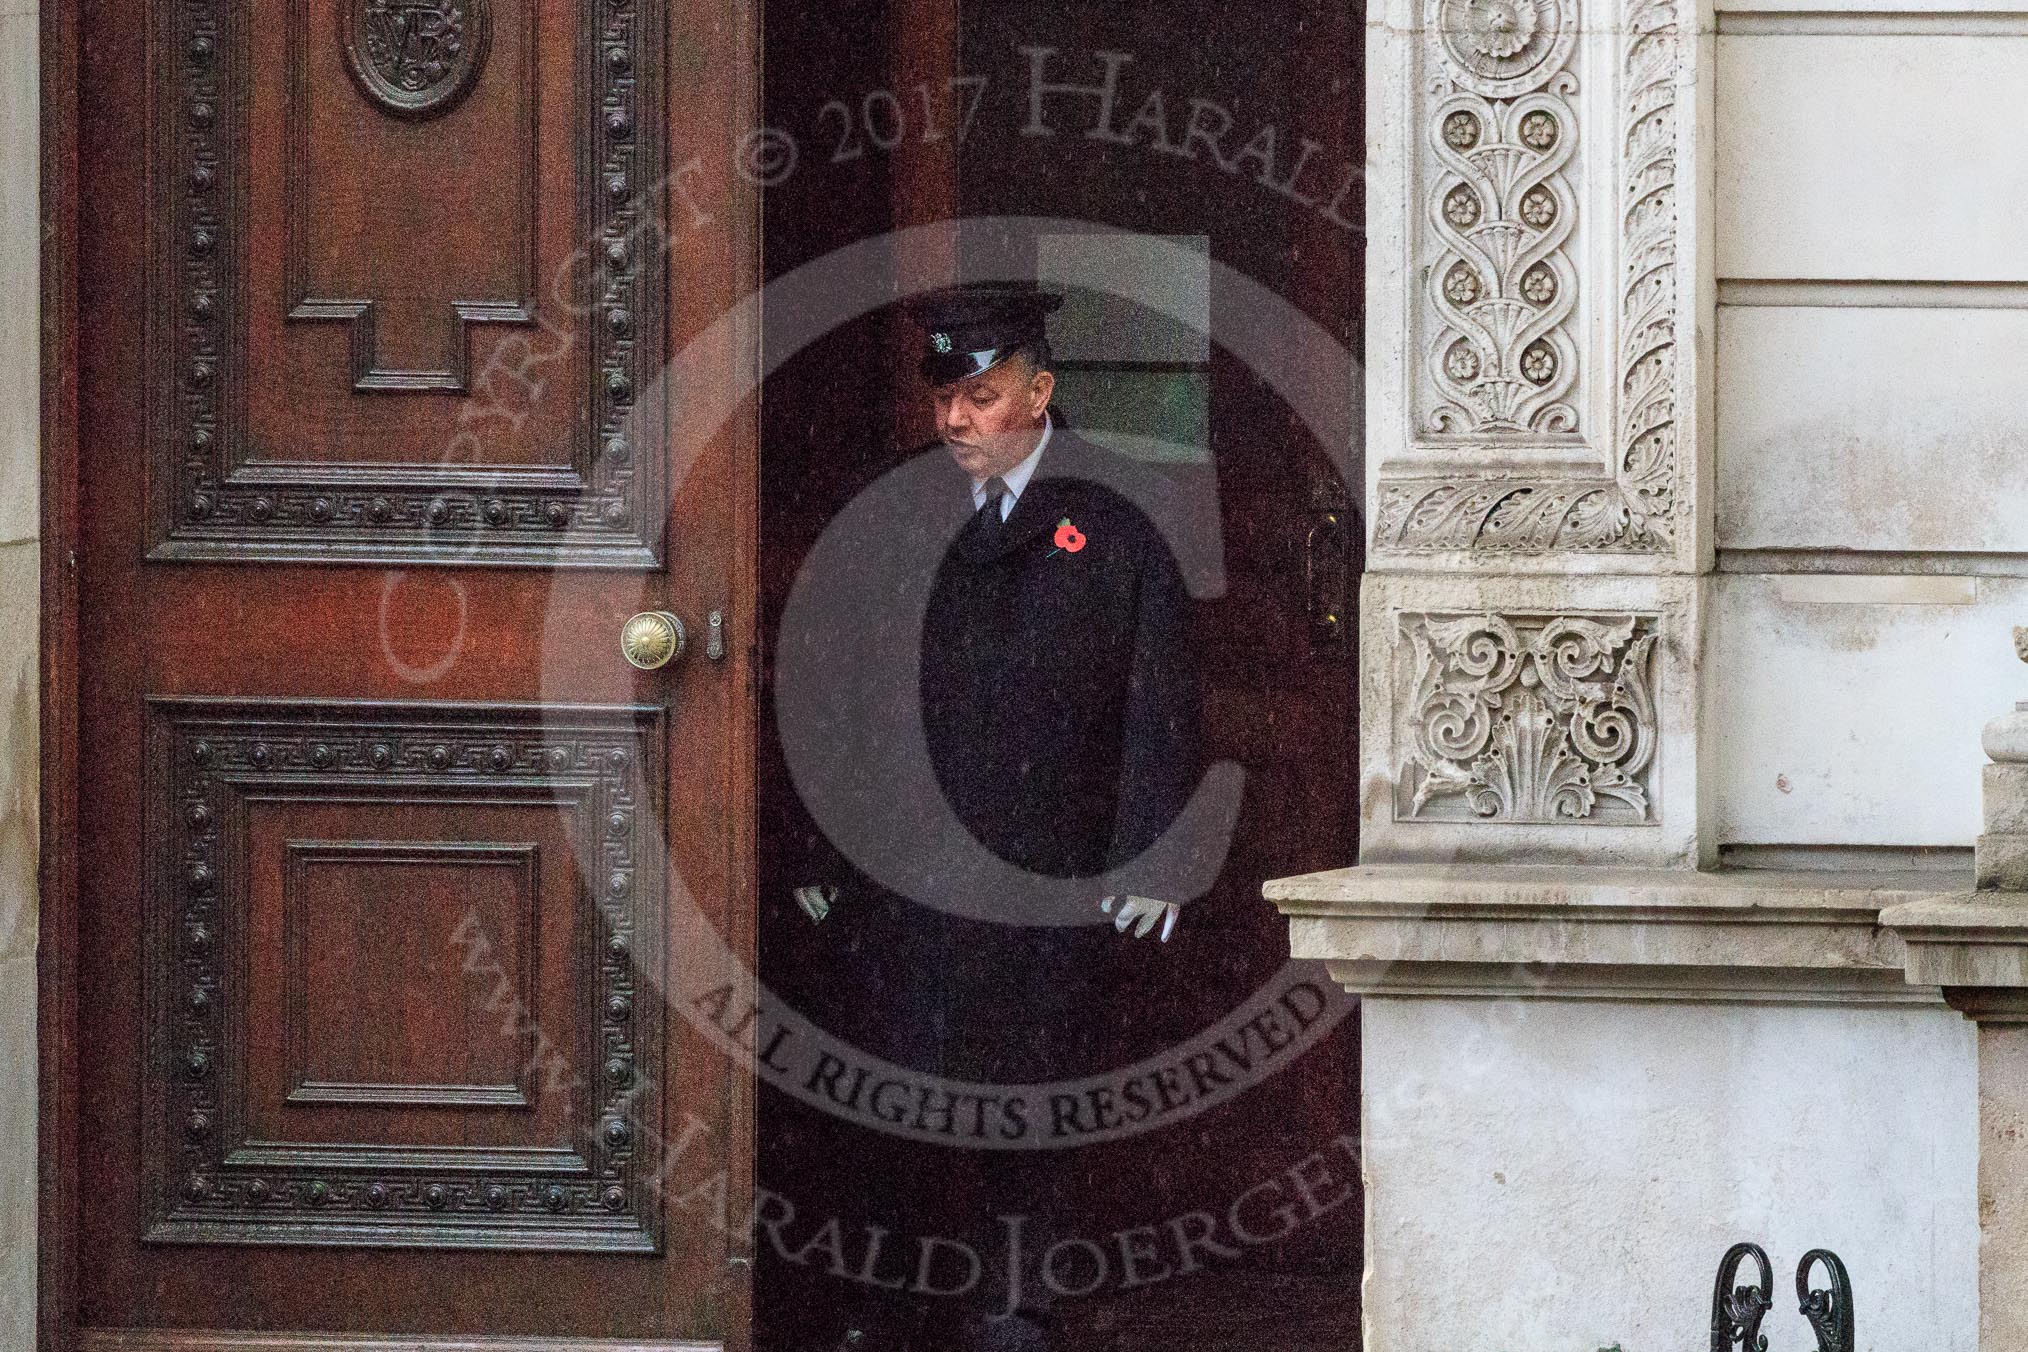 The doors of the Foreign and Commonwealth Office are opened on a wet morning before the Remembrance Sunday Cenotaph Ceremony 2018 at Horse Guards Parade, Westminster, London, 11 November 2018, 08:04.